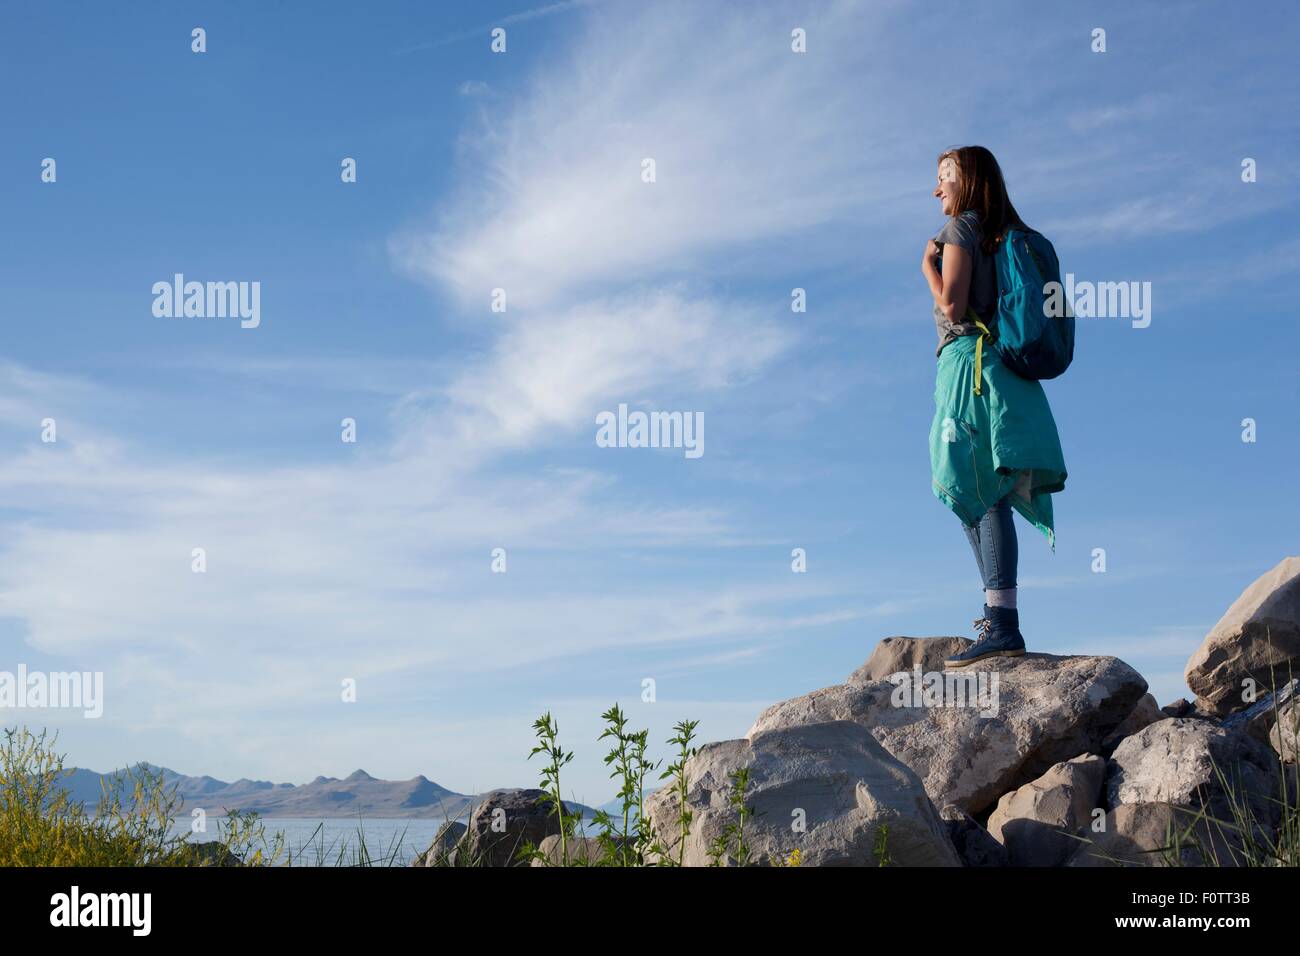 Rear view of young woman wearing backpack standing on rocks looking away, Great Salt Lake, Utah, USA Stock Photo